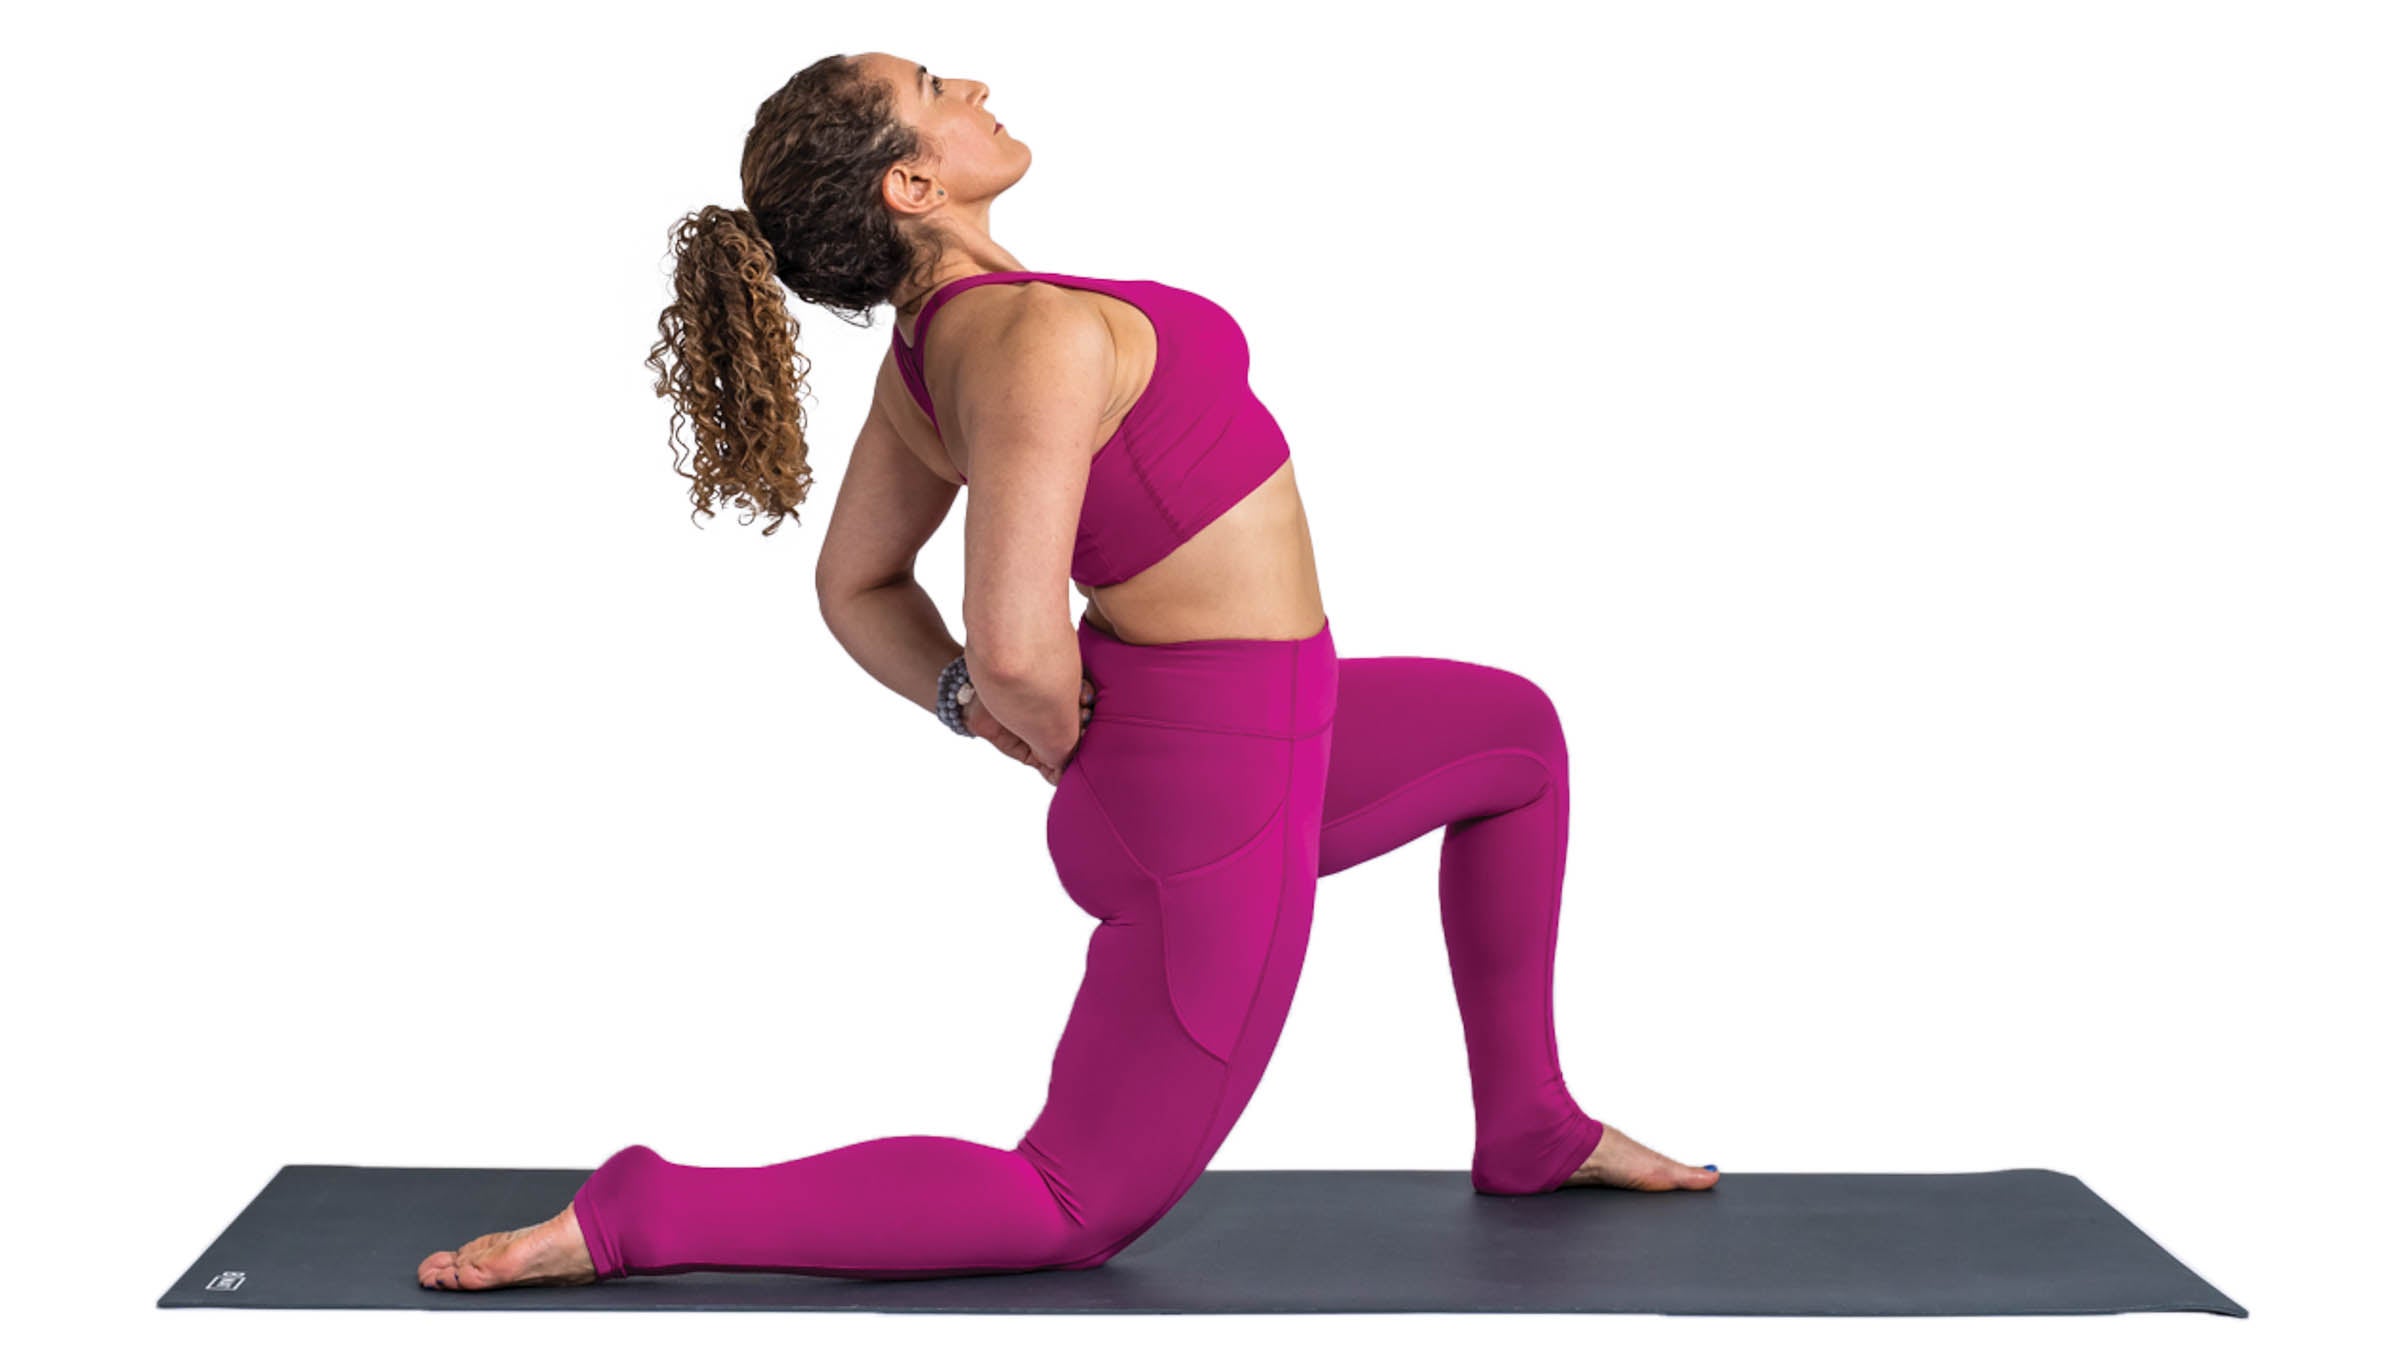 What are some yoga poses for Vata, Pitta and Kapha body types? - Quora